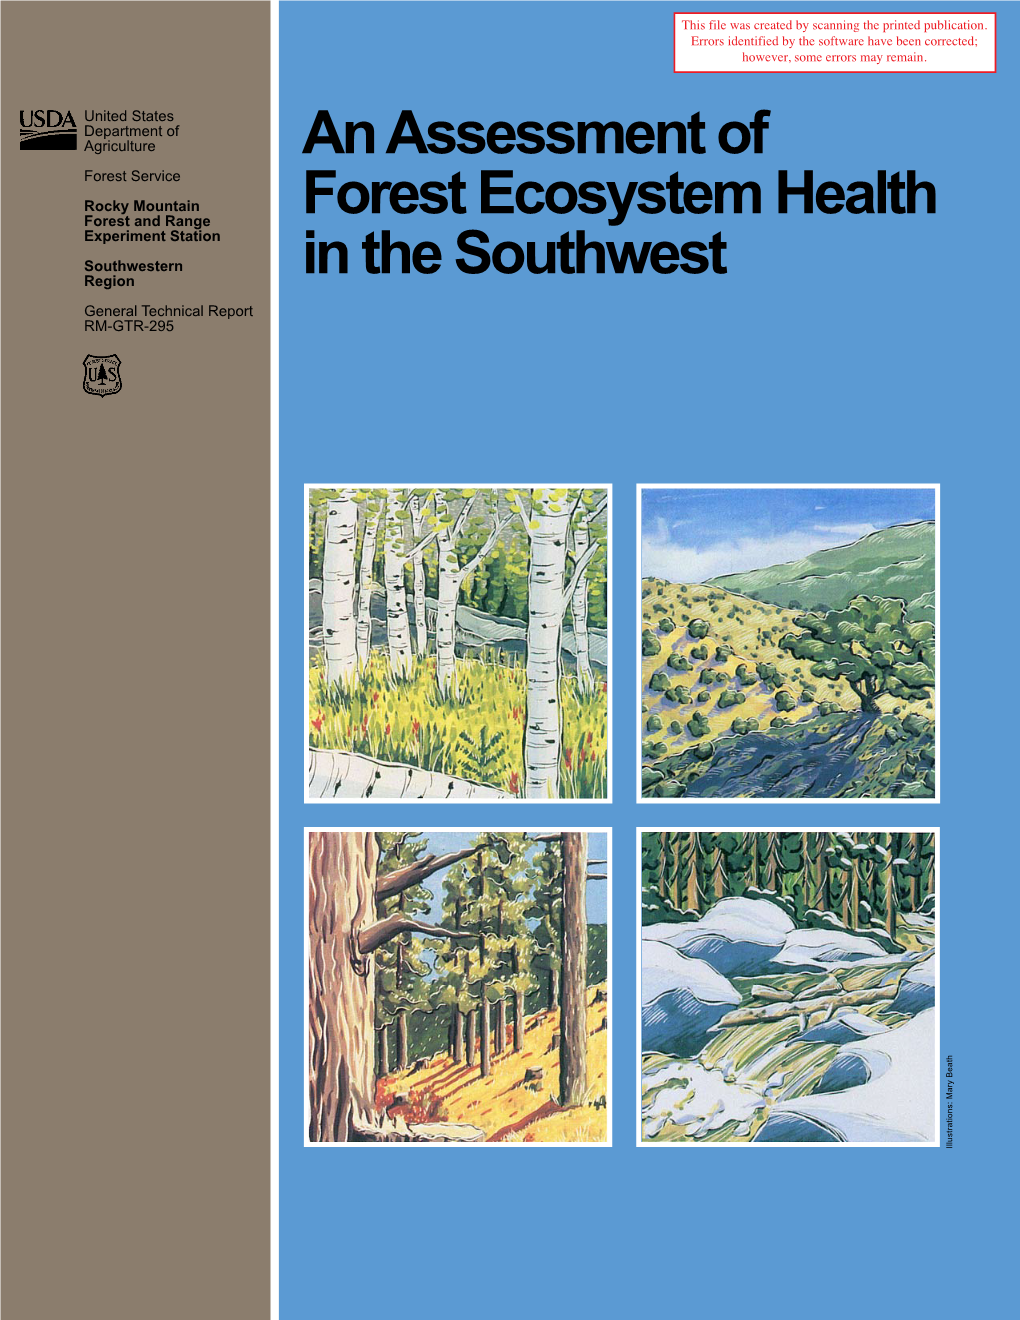 An Assessment of Forest Ecosystem Health in the Southwest